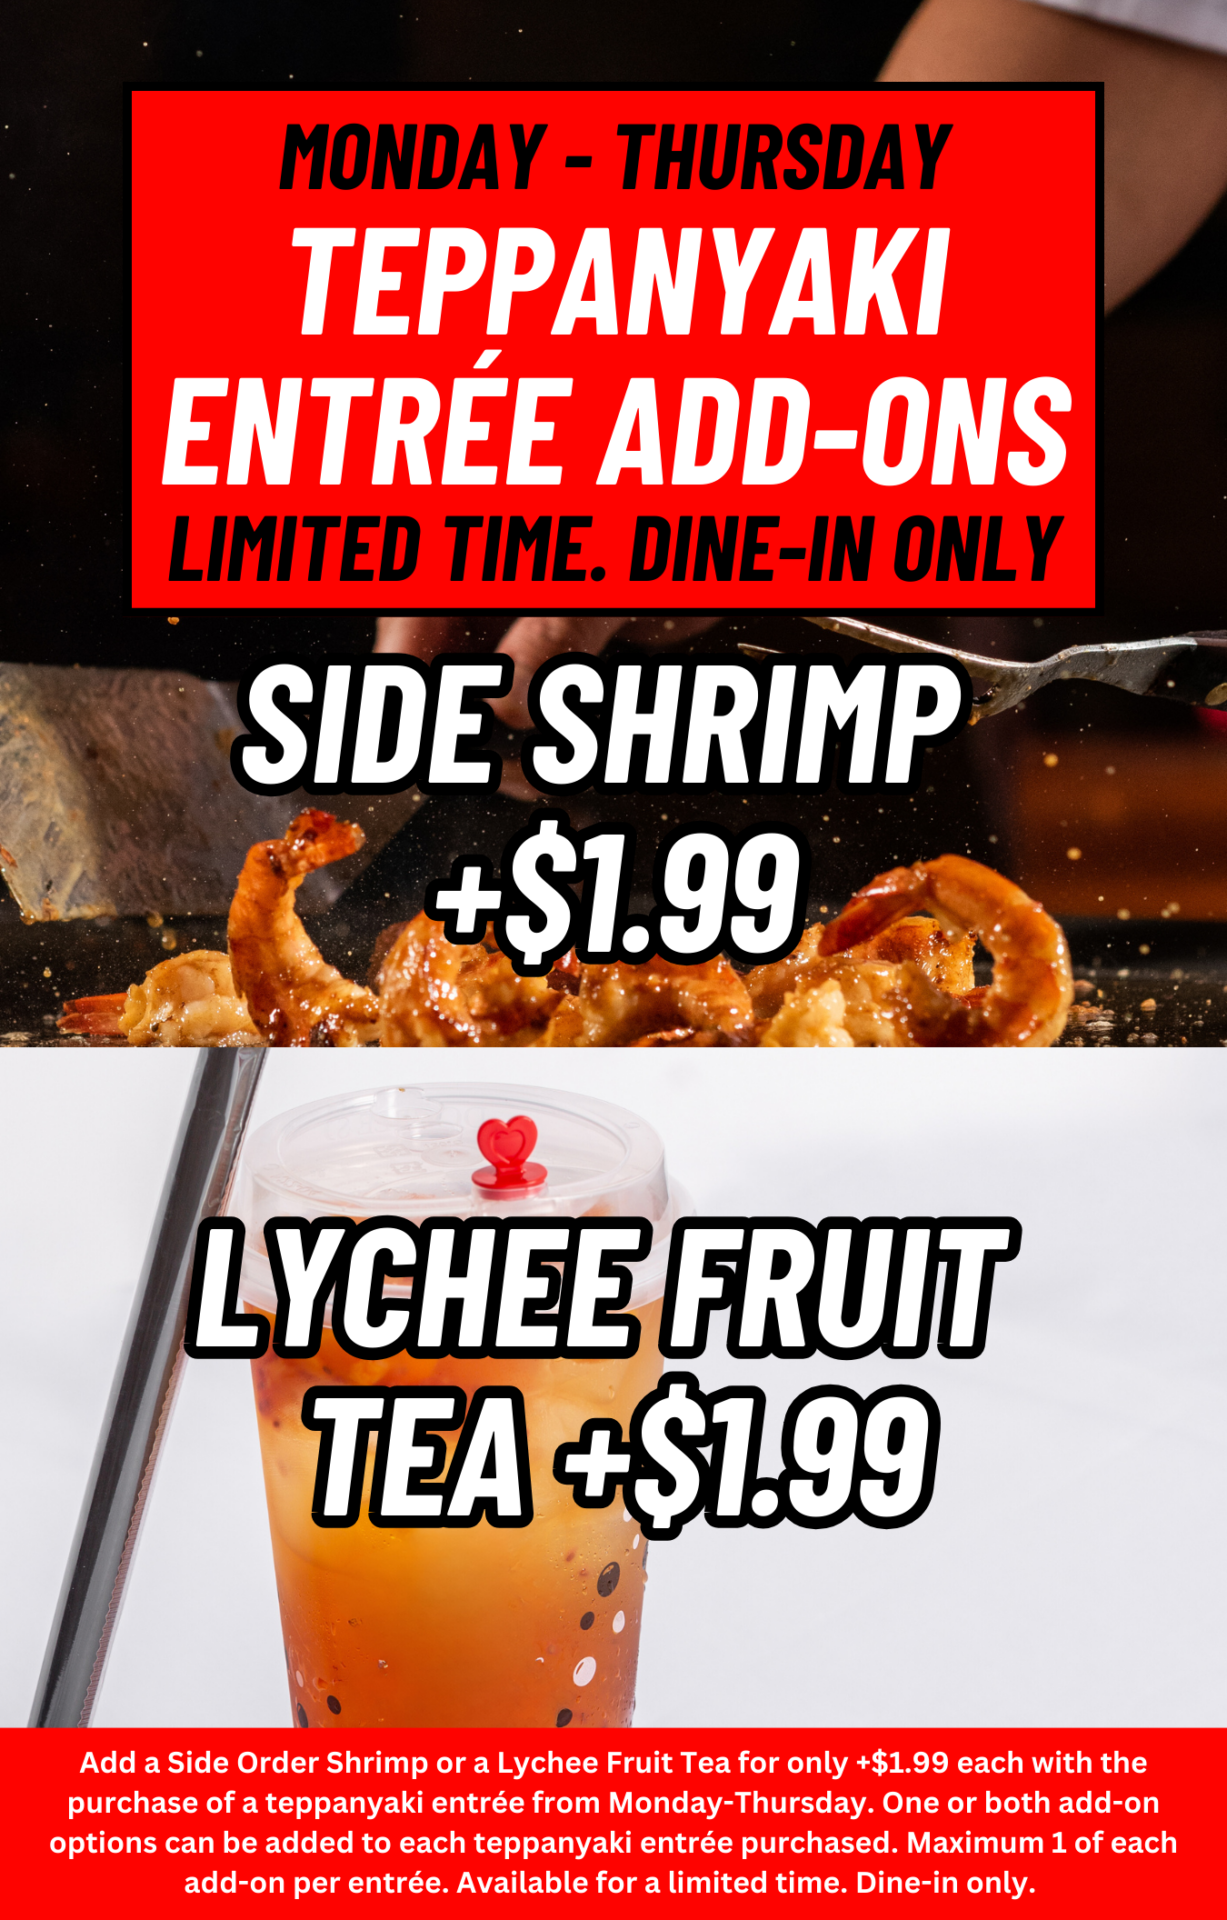 Monday - Thursday Teppanyaki entrÉe add-ons. Limited time. Dine-in only. Side shrimp +$1.99. Lychee Fruit Tea +$1.99. Add a Side Order Shrimp or a Lychee Fruit Tea for only +$1.99 each with the purchase of a teppanyaki entrée from Monday-Thursday. One or both to each teppanyaki entrée purchased. Maximum 1 of each add-on per entrée. Available for a limited time. Dine-in only. 